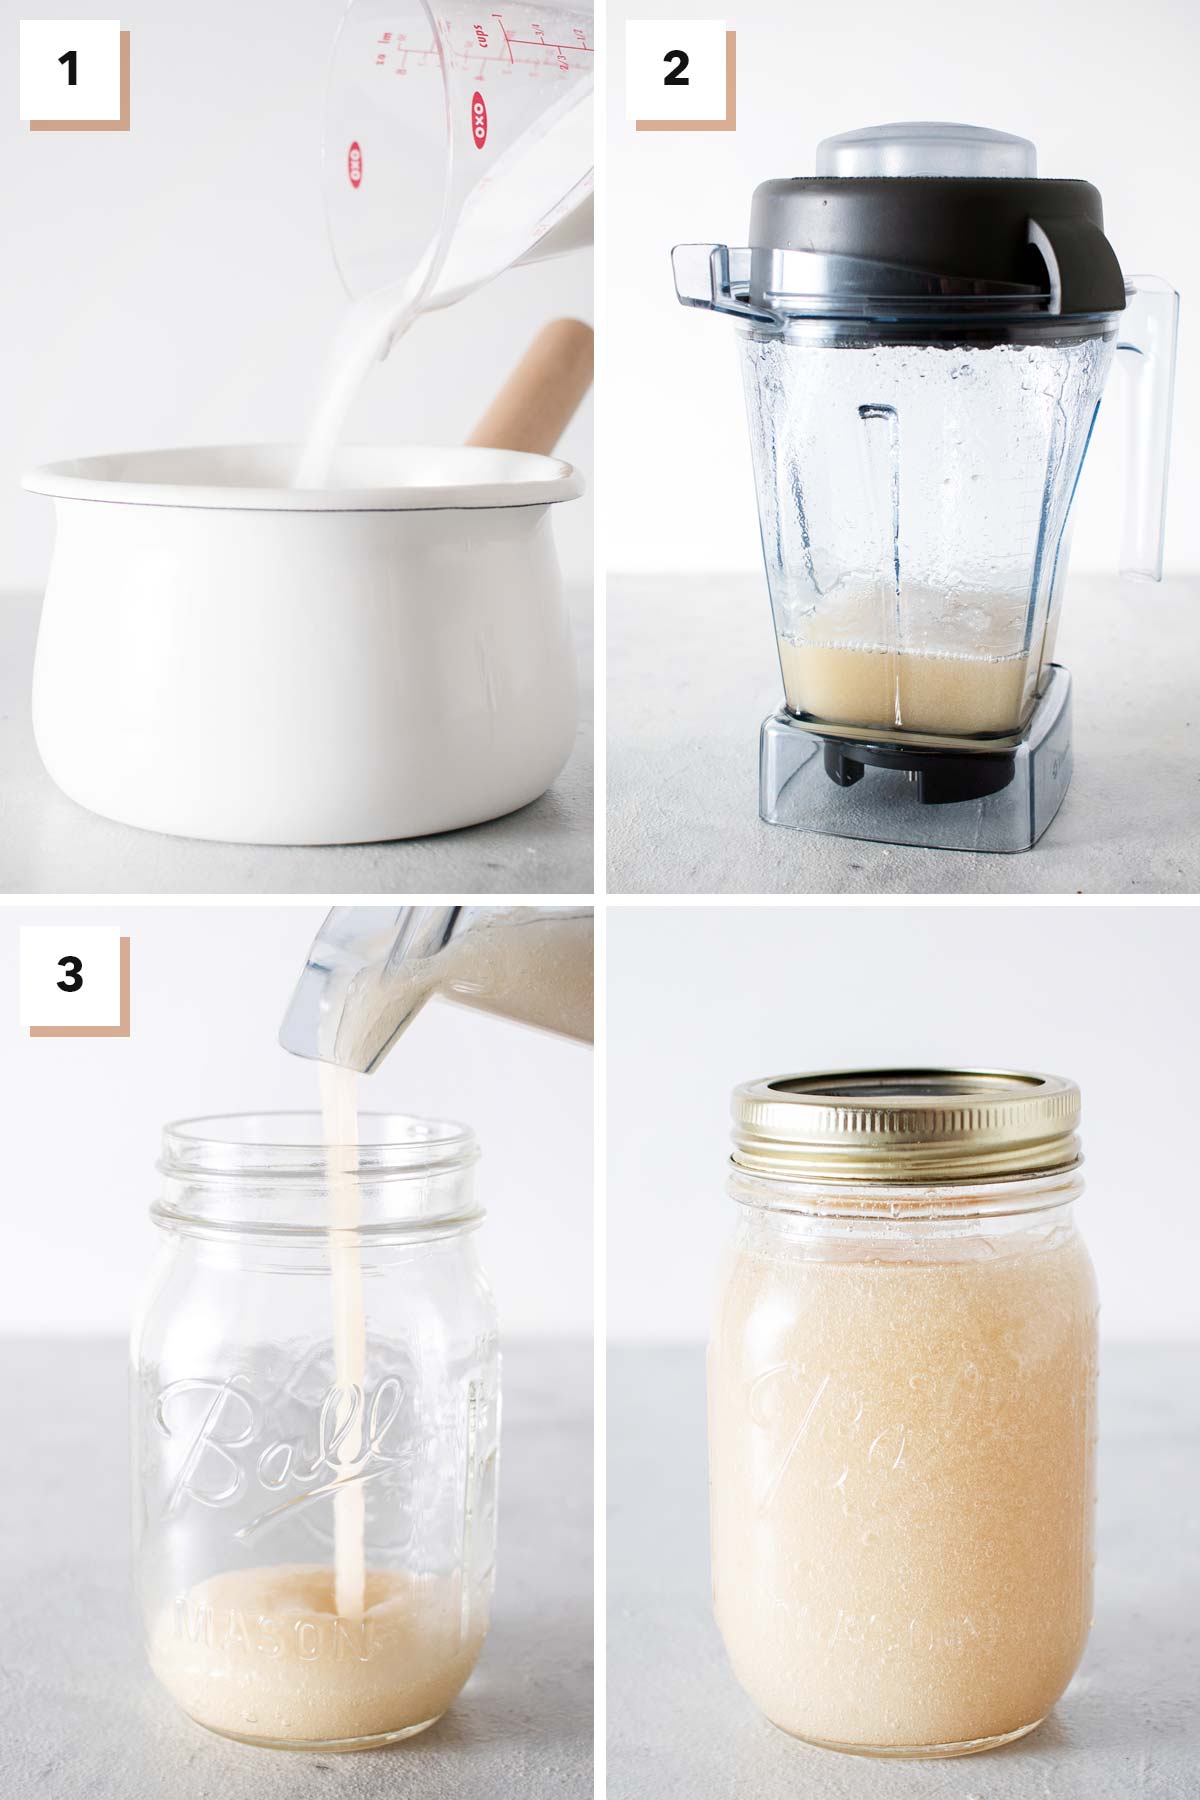 Four photo collage showing steps to make Starbucks Frappuccino base.